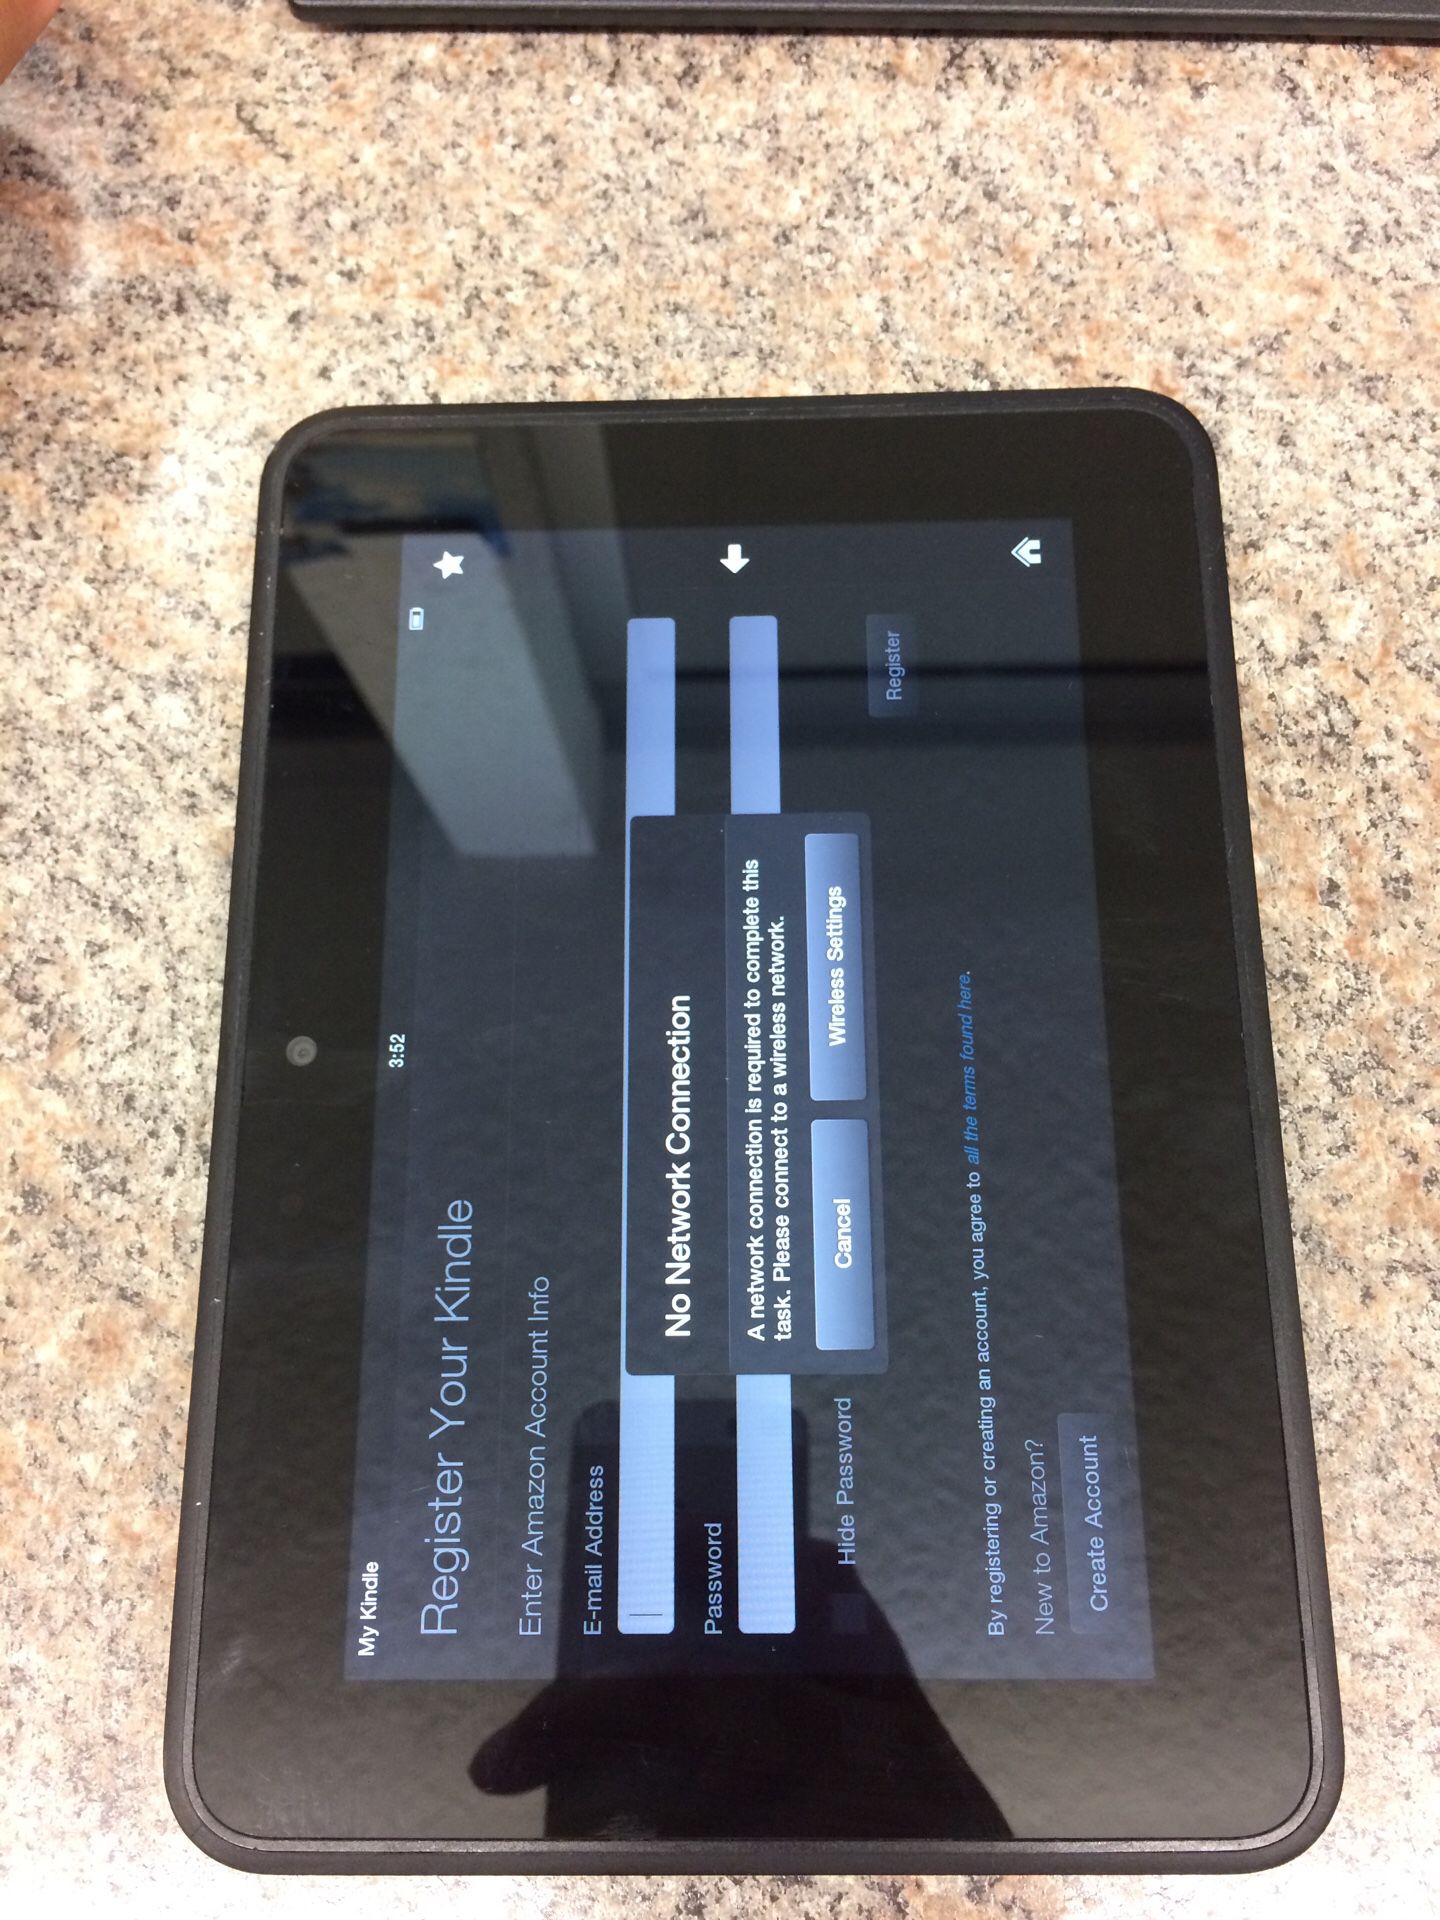 Amazon kindle fire HD 7 2nd generation nice and clean with charger